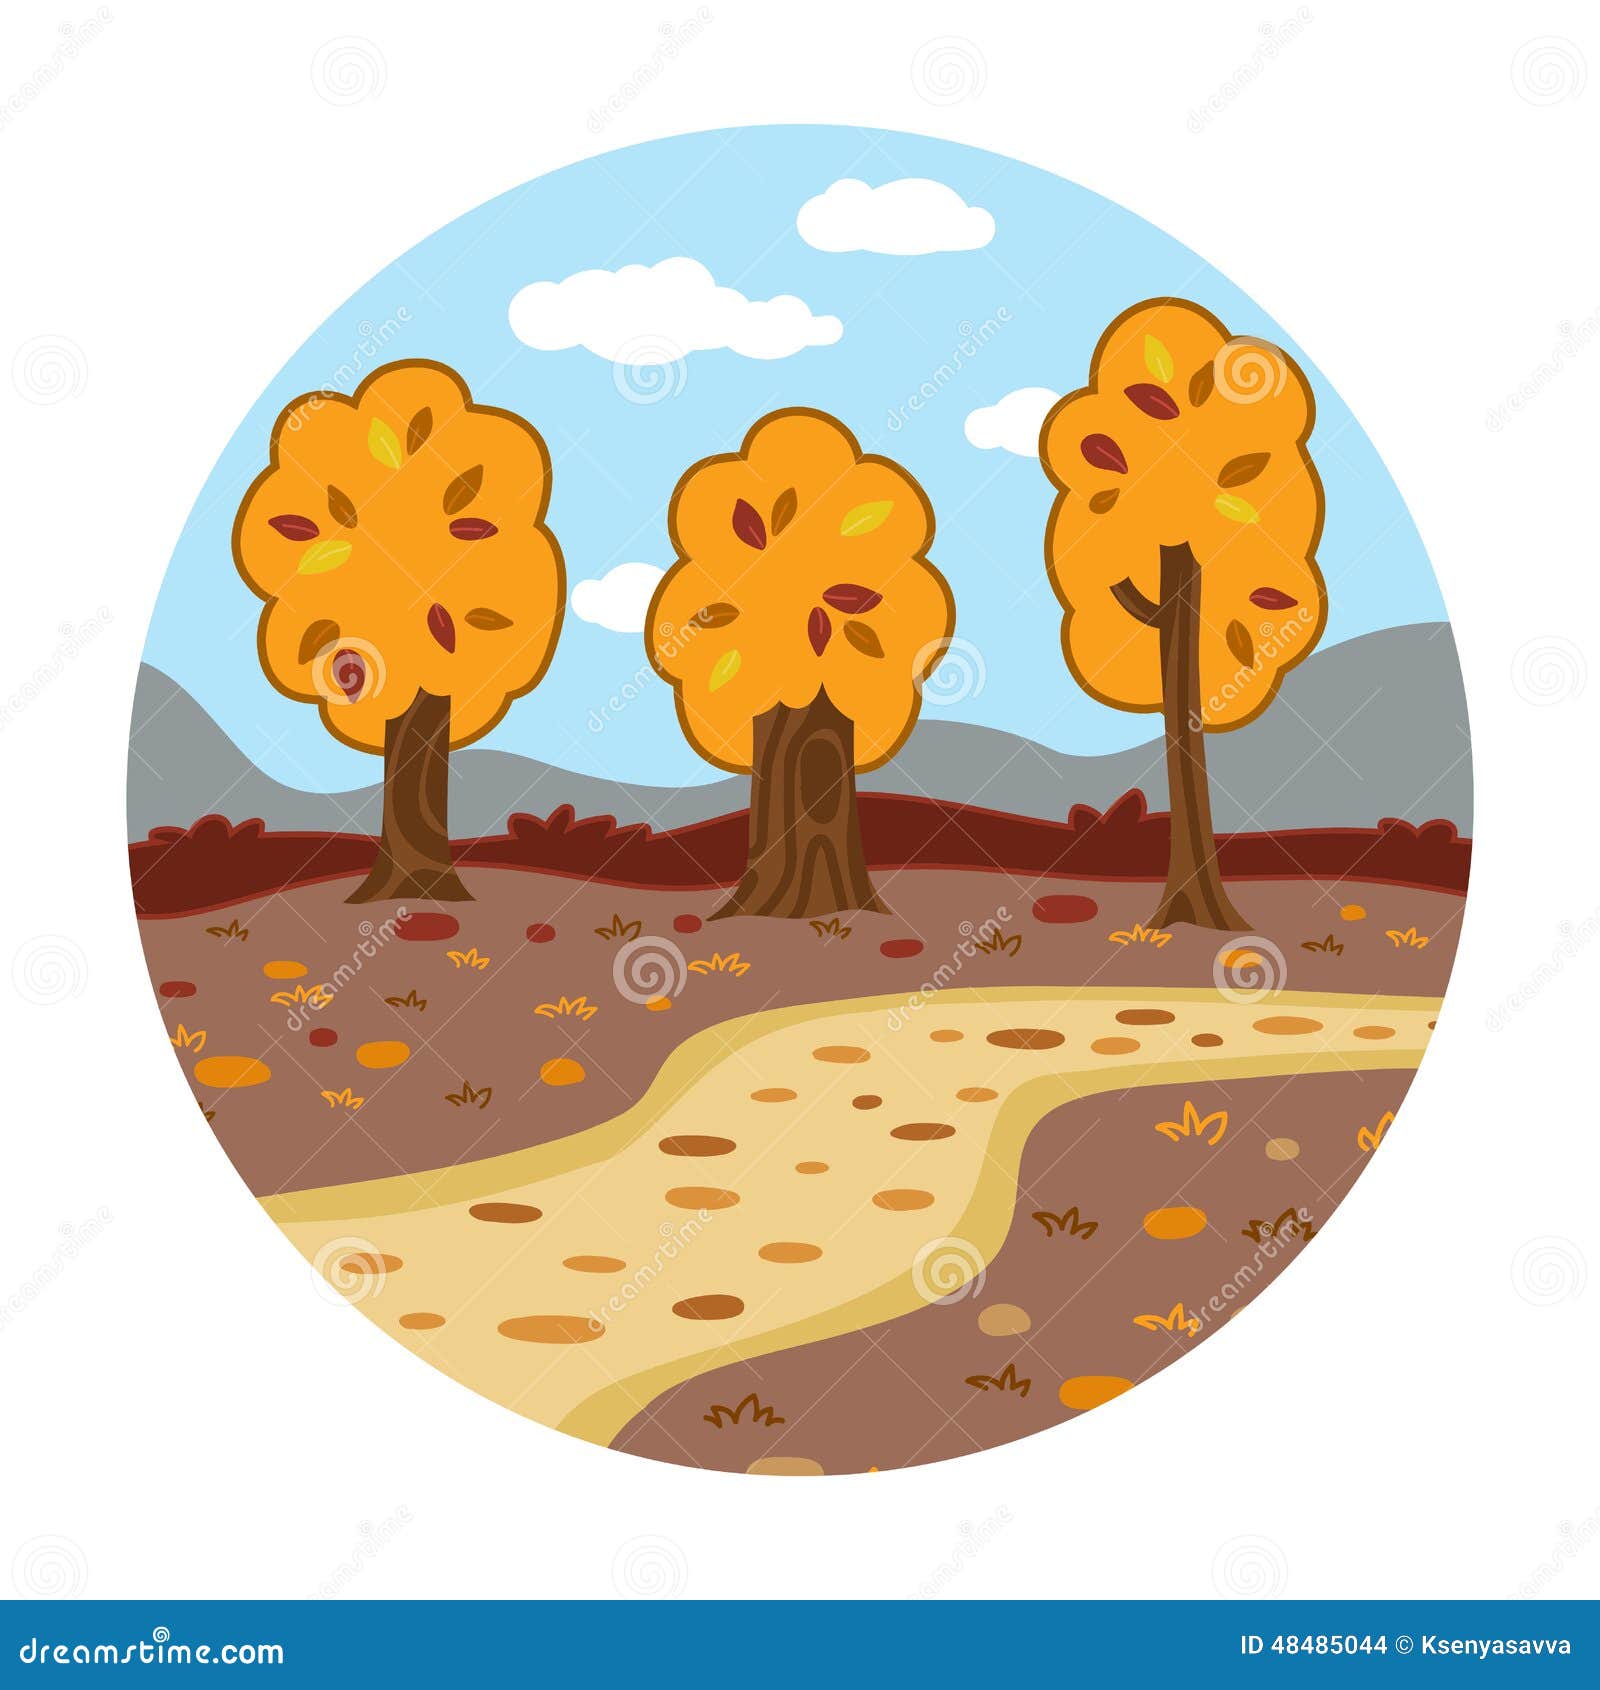 circle locations, little landscape (autumn day in the woods)